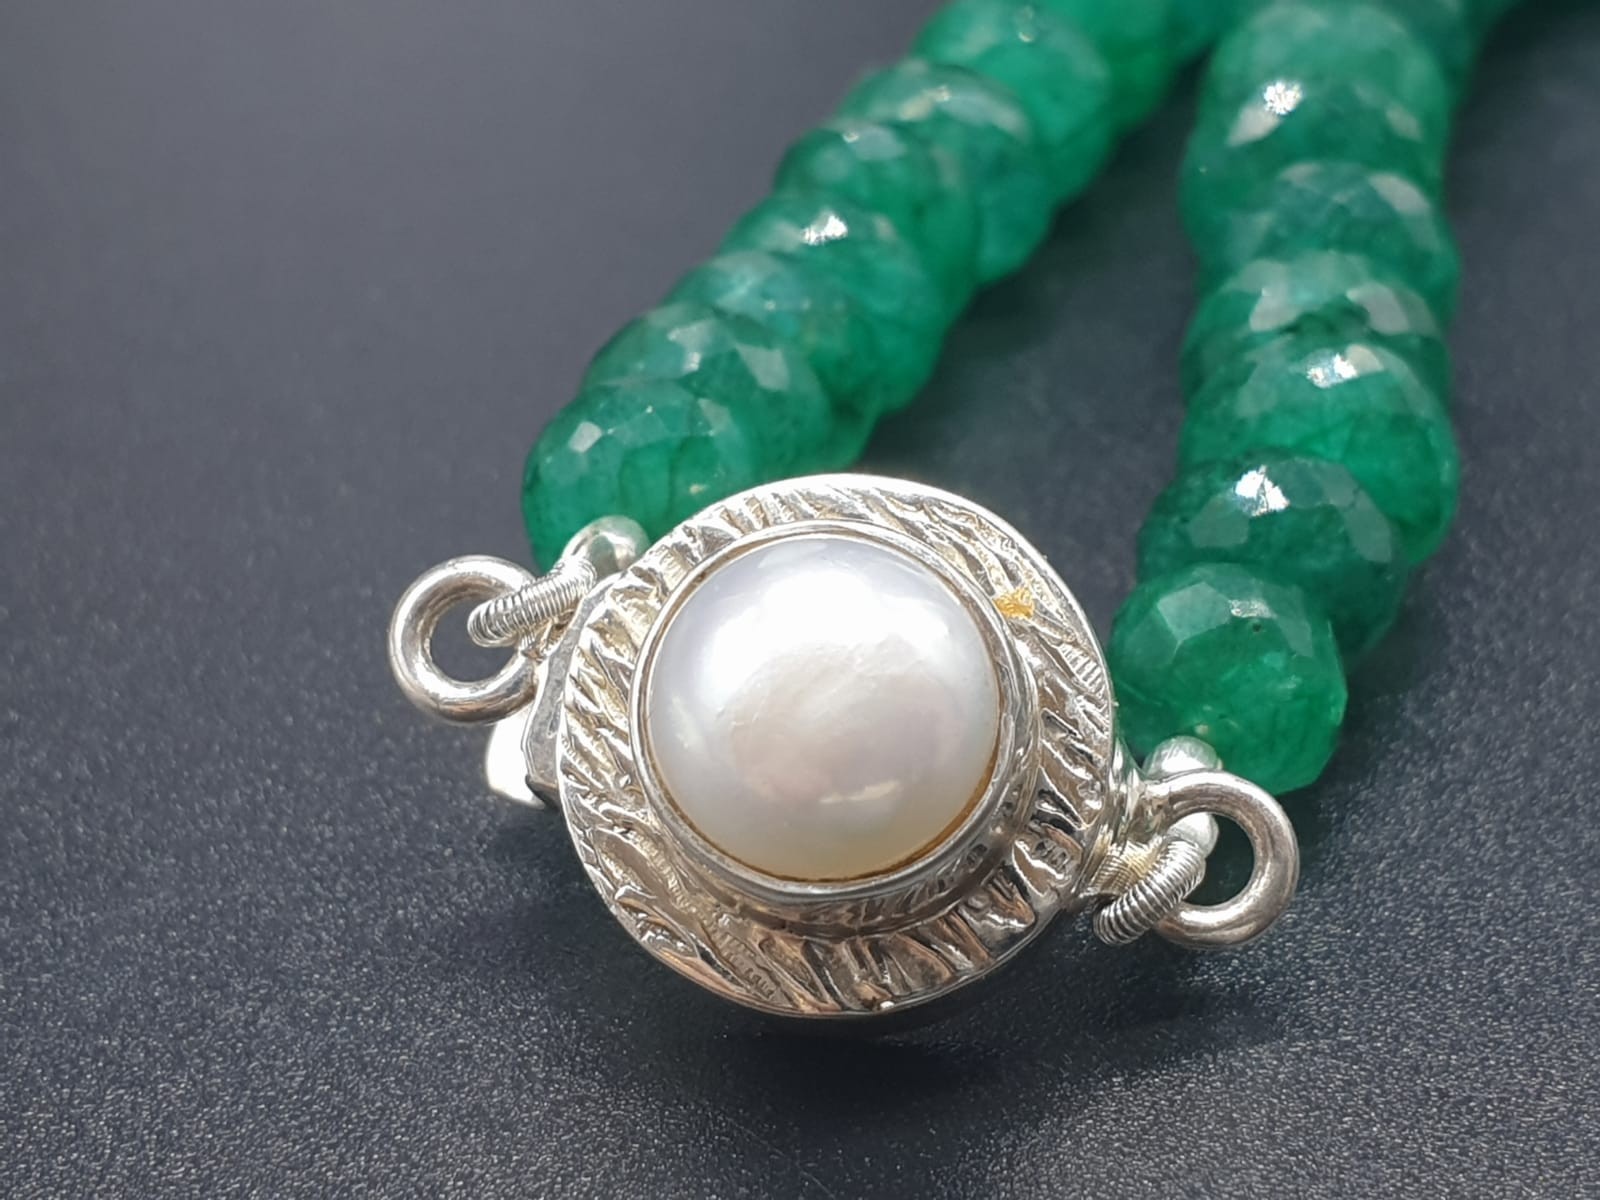 440cts Emerald Necklace with Pearl Clasp - Image 3 of 6